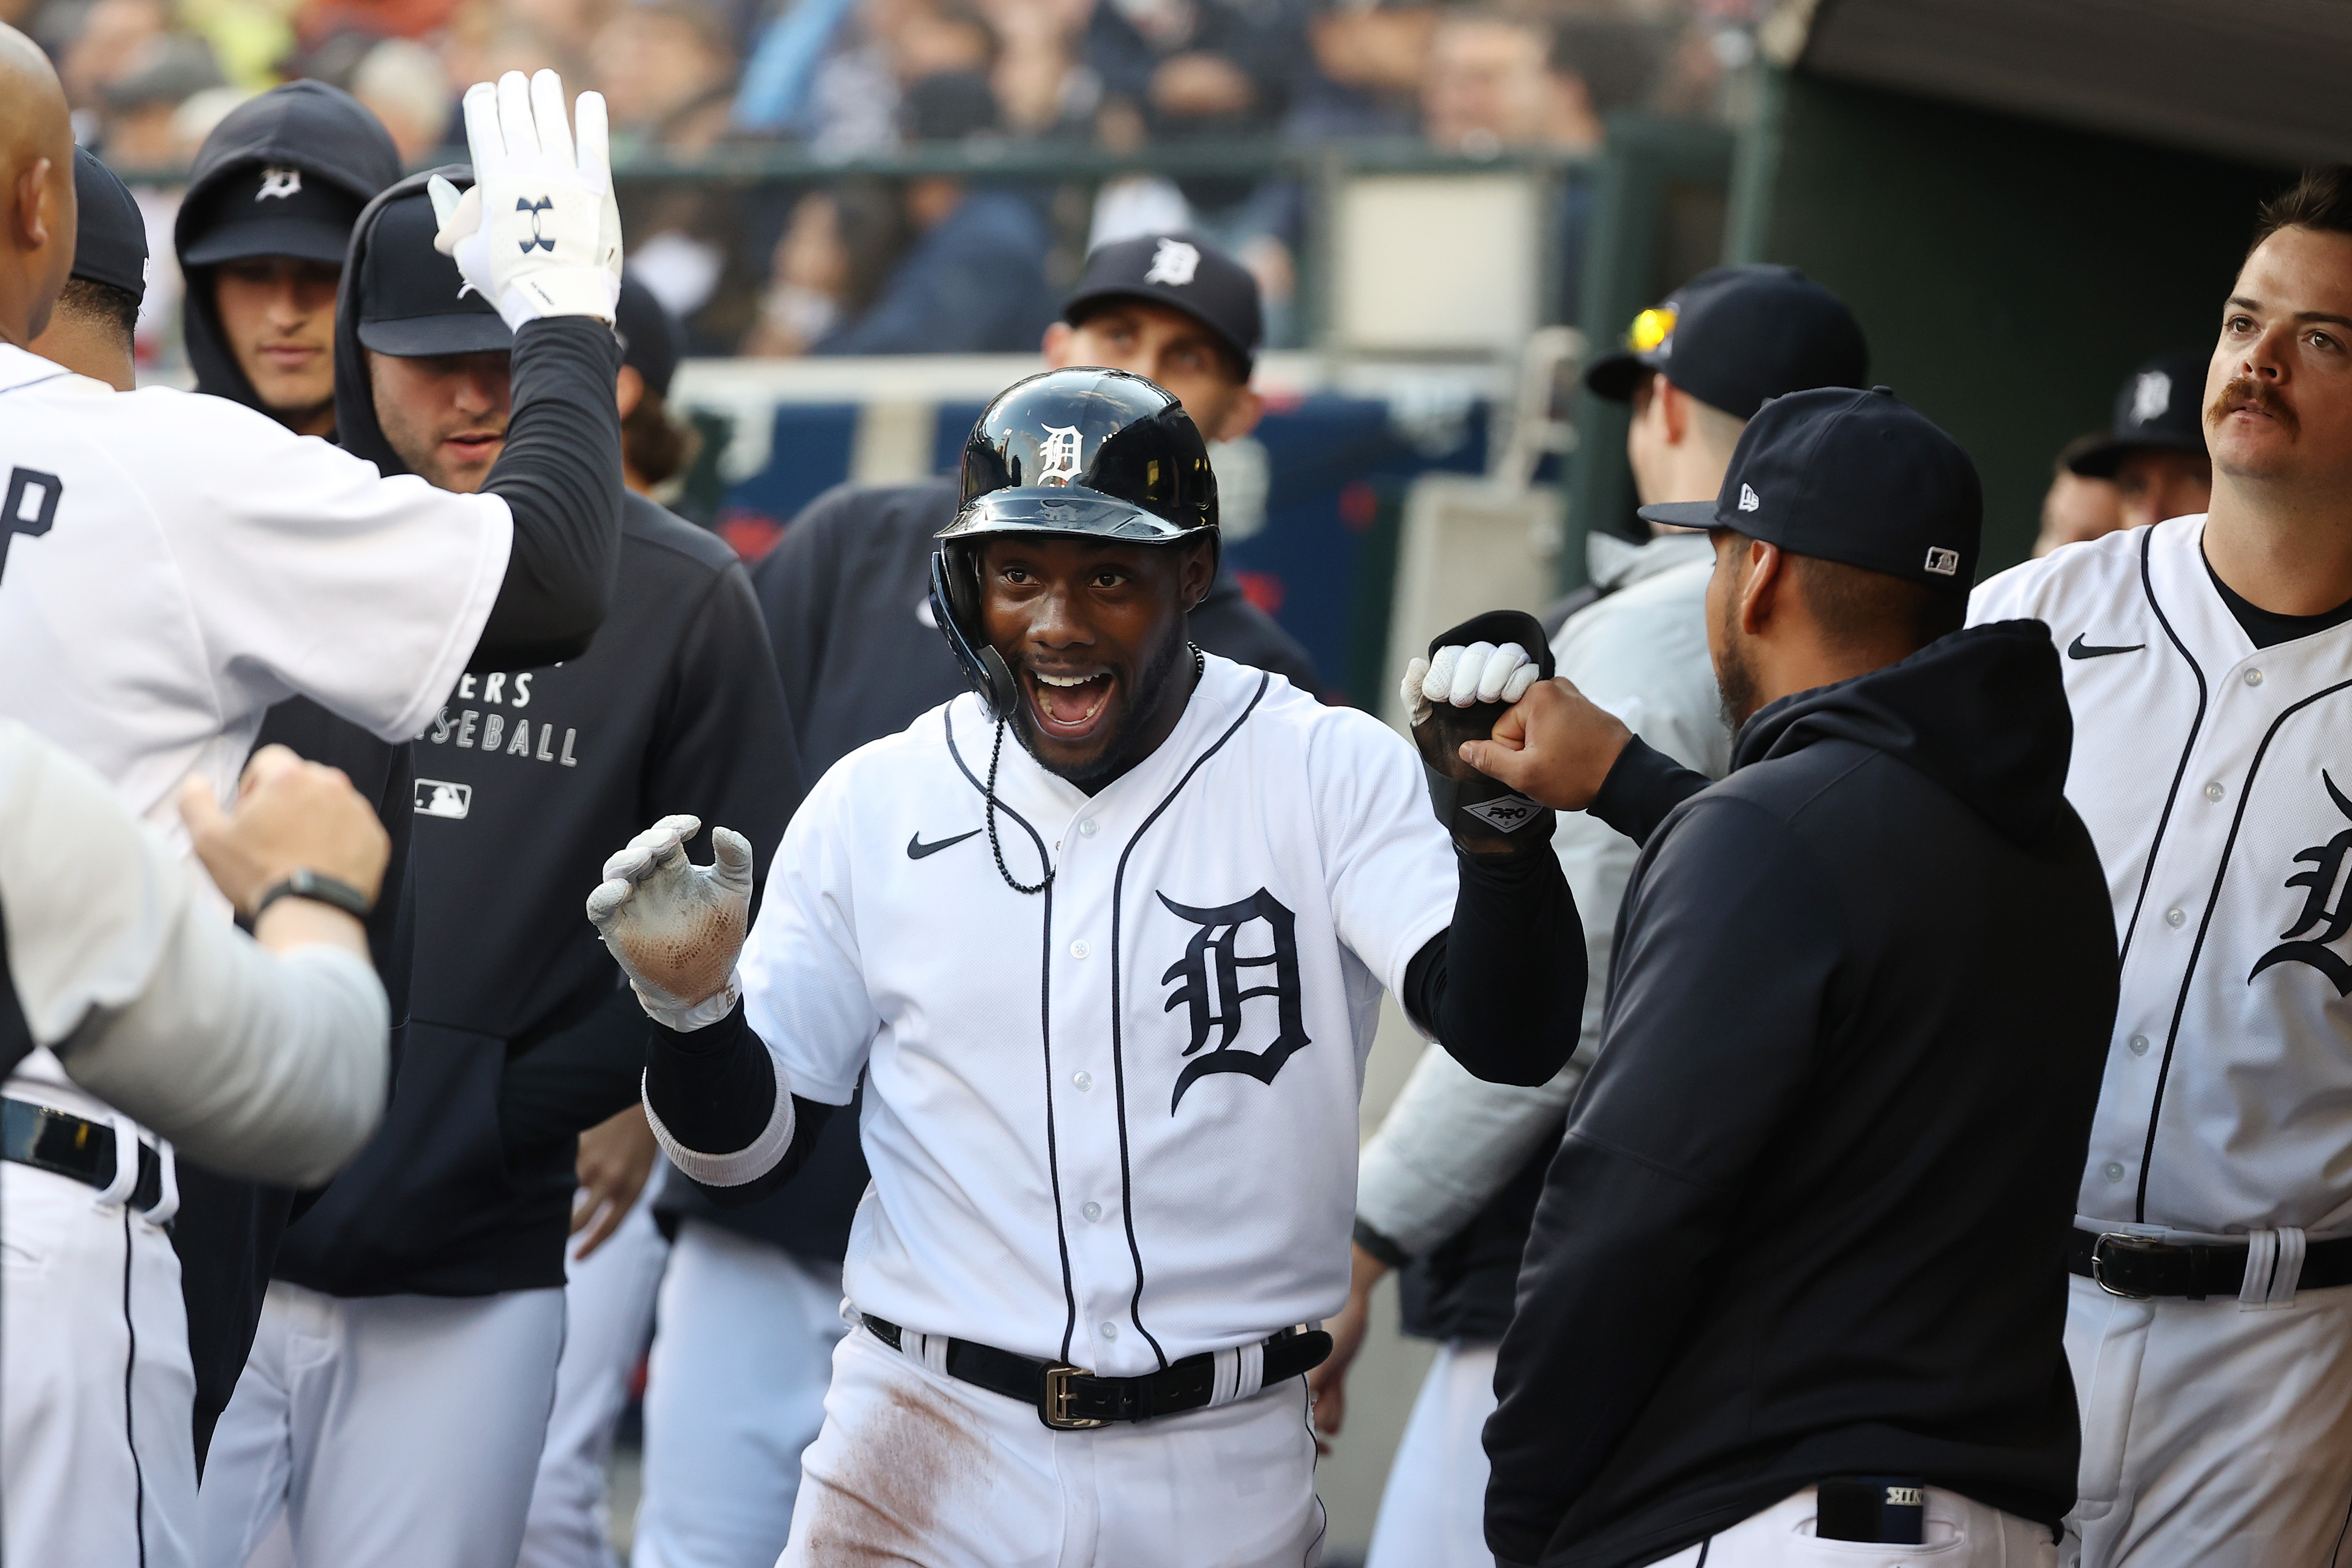 Detroit Tigers 2021 spring training schedule released